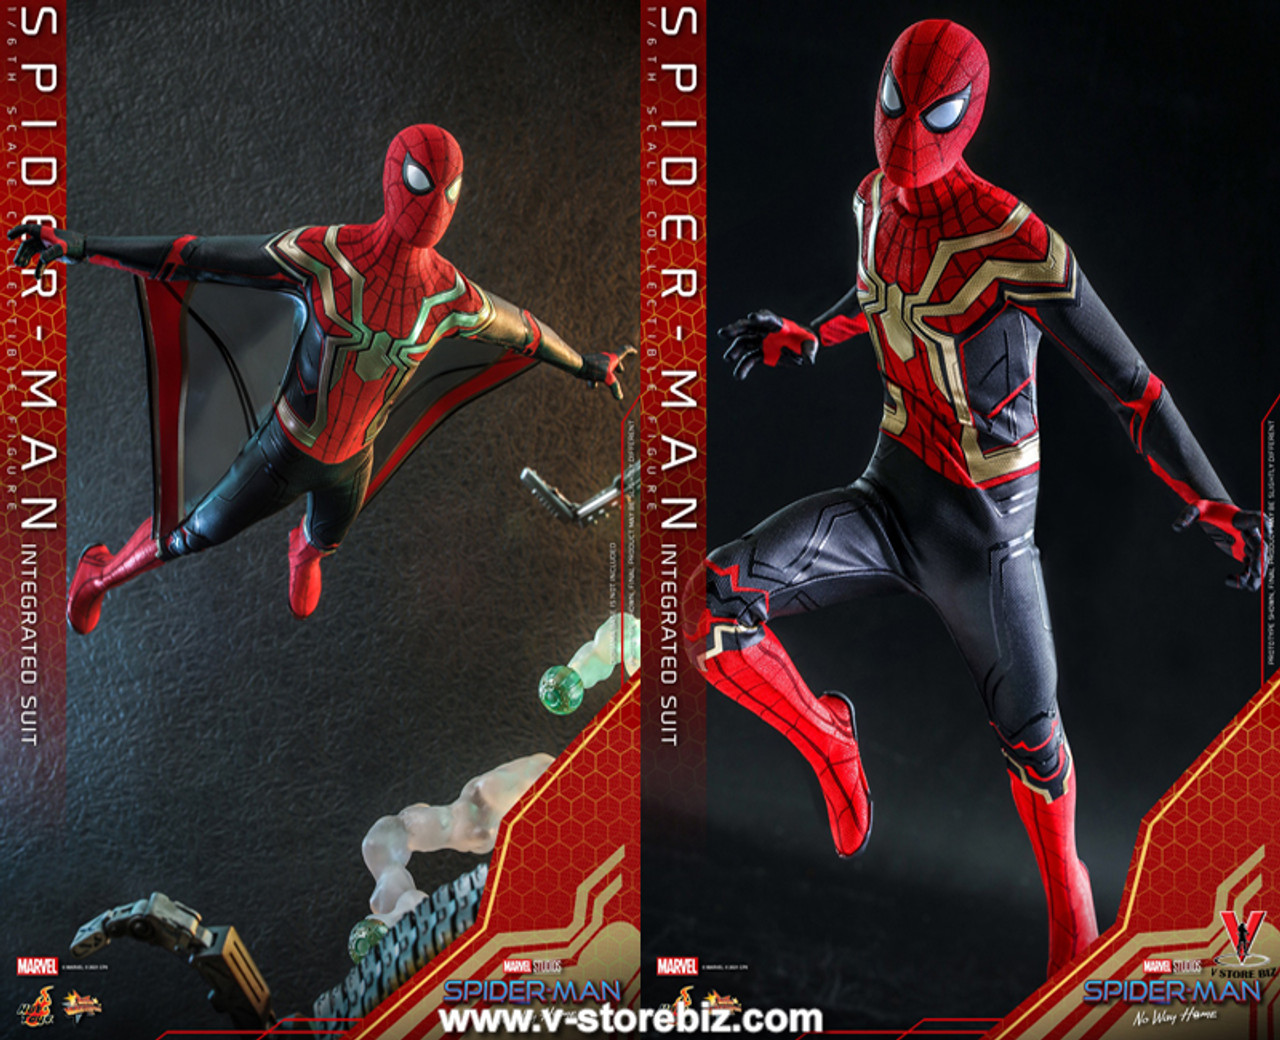 Hot Toys - Spider-Man Integrated Suit - Marvel's Spider-Man: No